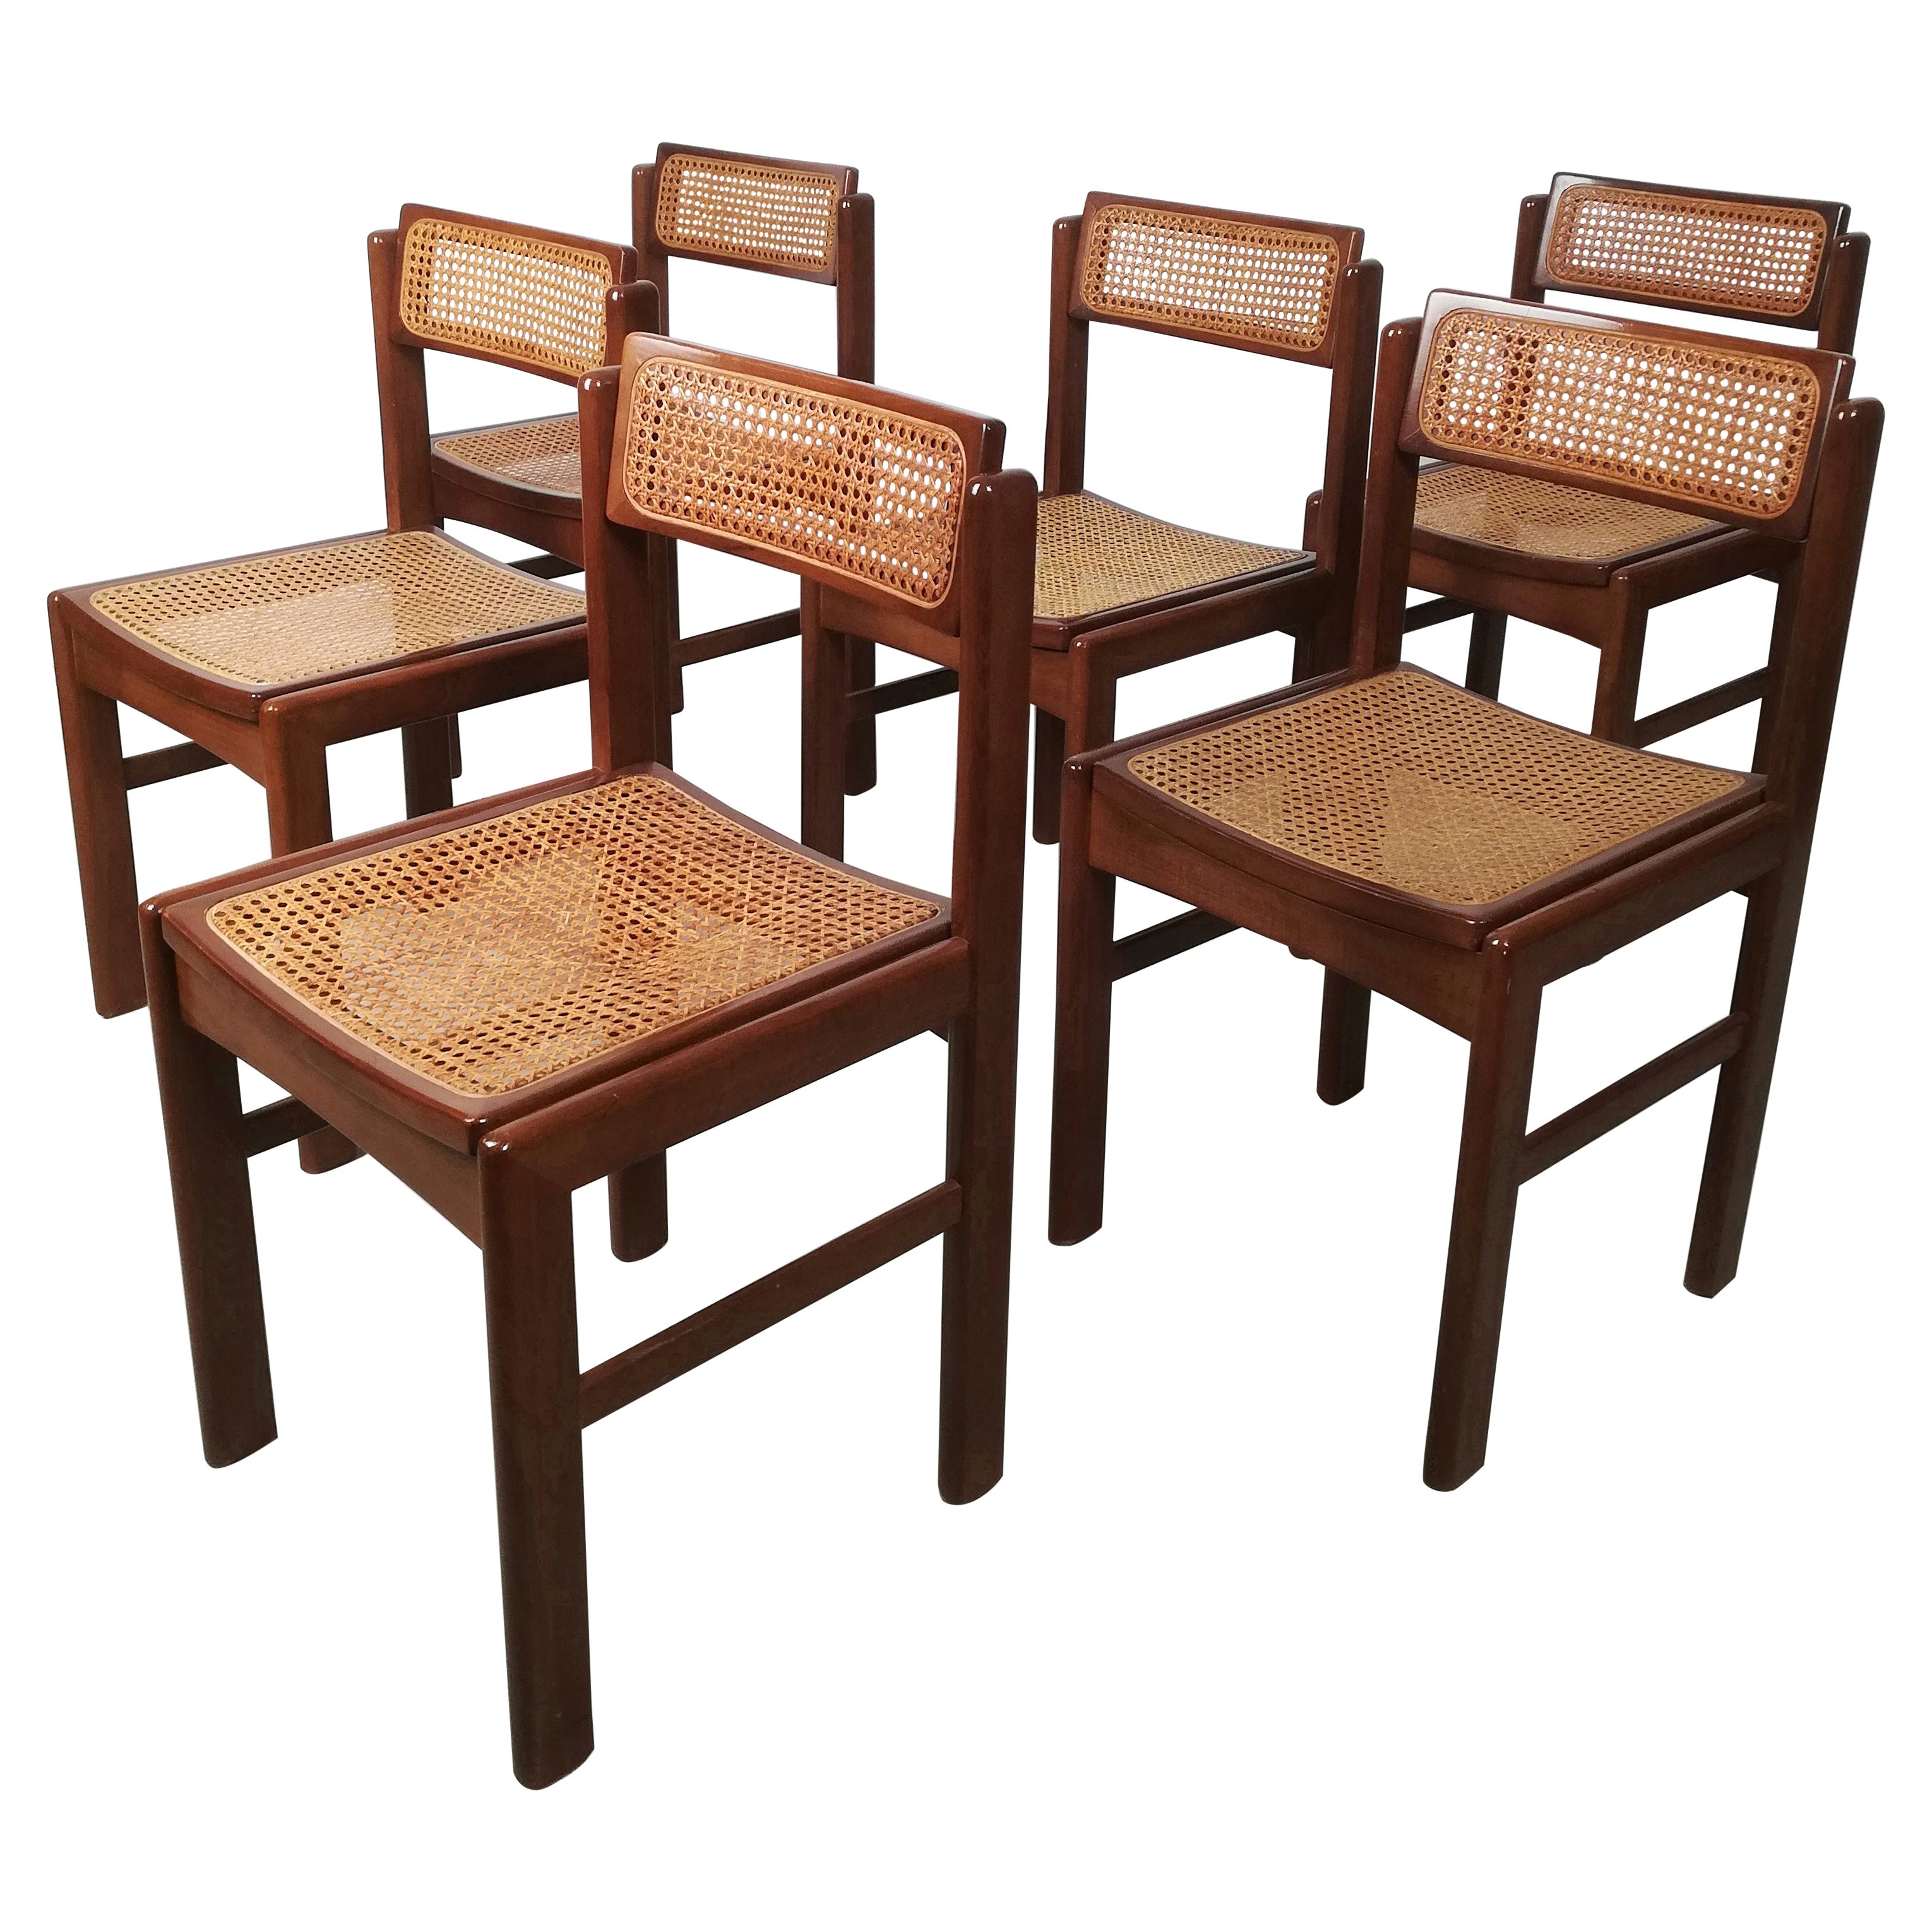 Italian Vintage Chairs in Walnut and Natural Rattan, Italy 1970s